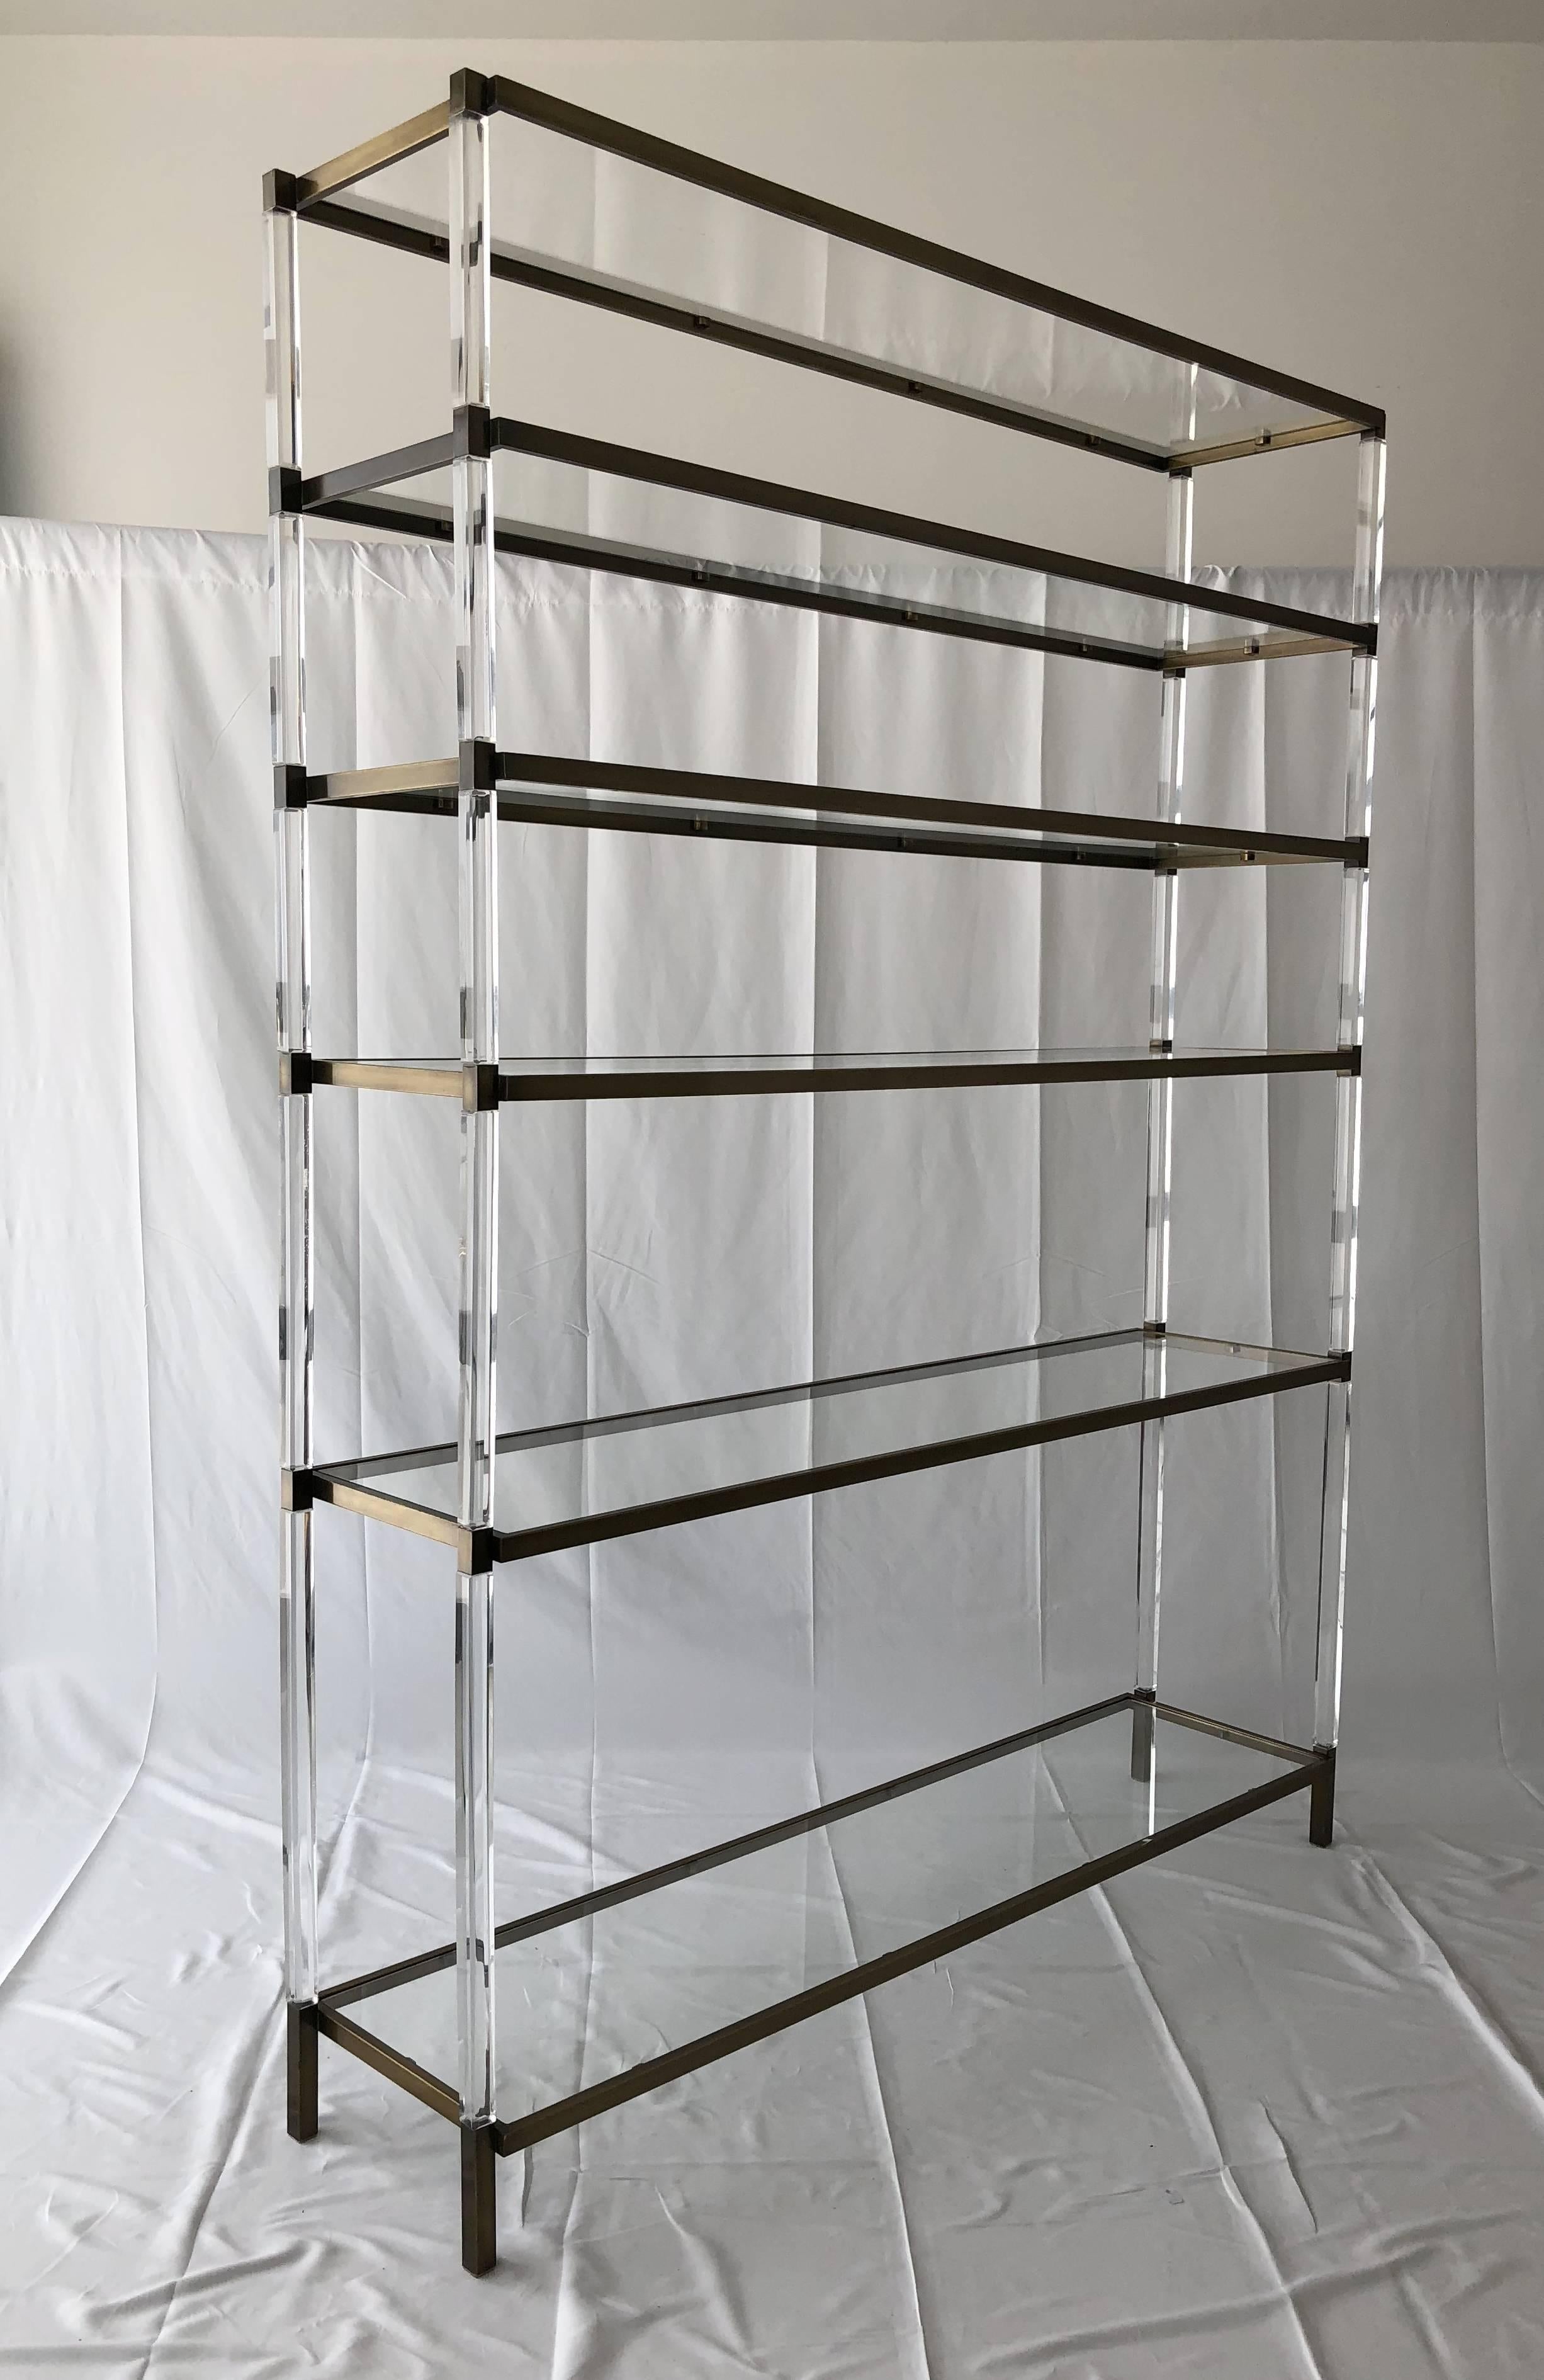 Stunning Lucite and brass étagère/shelving unit designed and manufactured by Charles Hollis Jones.
This shelving unit was designed and manufactured in 1966 during his time with Hudson Rissman and it was a custom piece for a particular client.
The